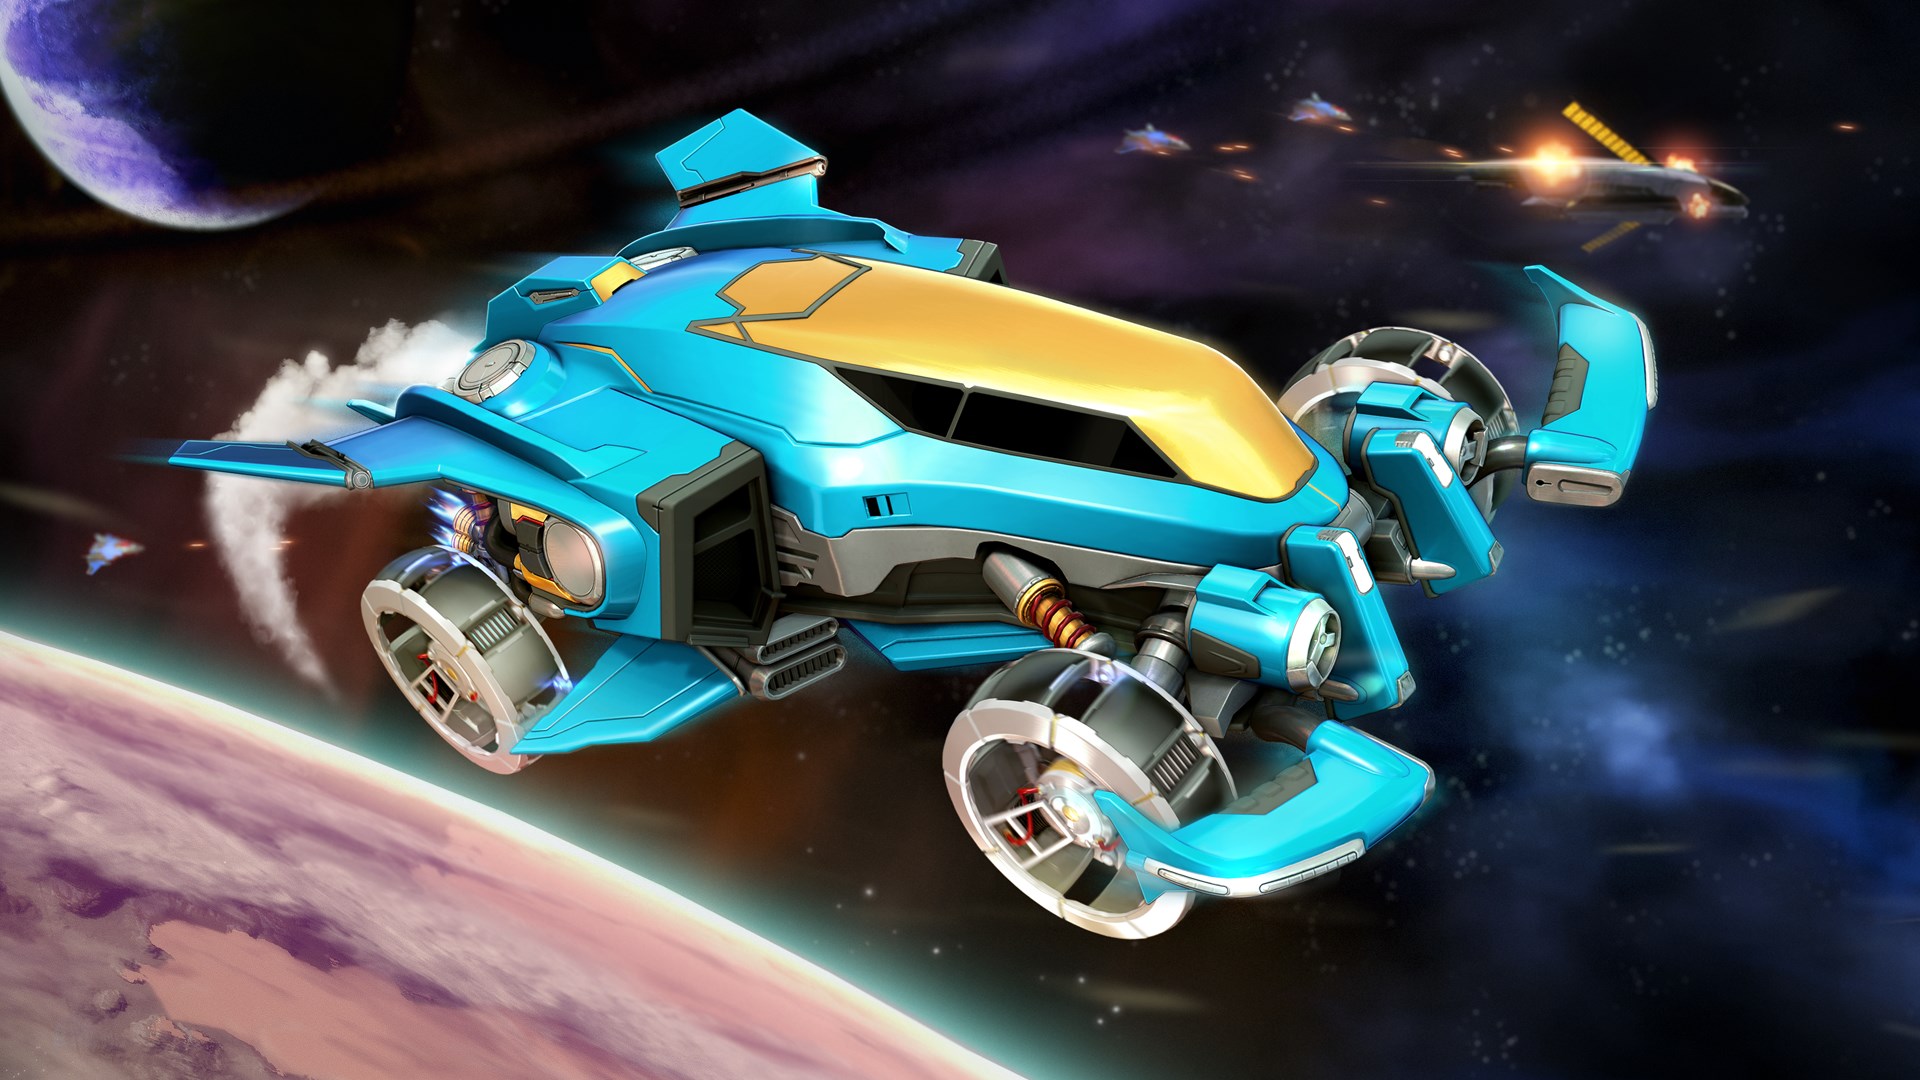 Rocket League free to play